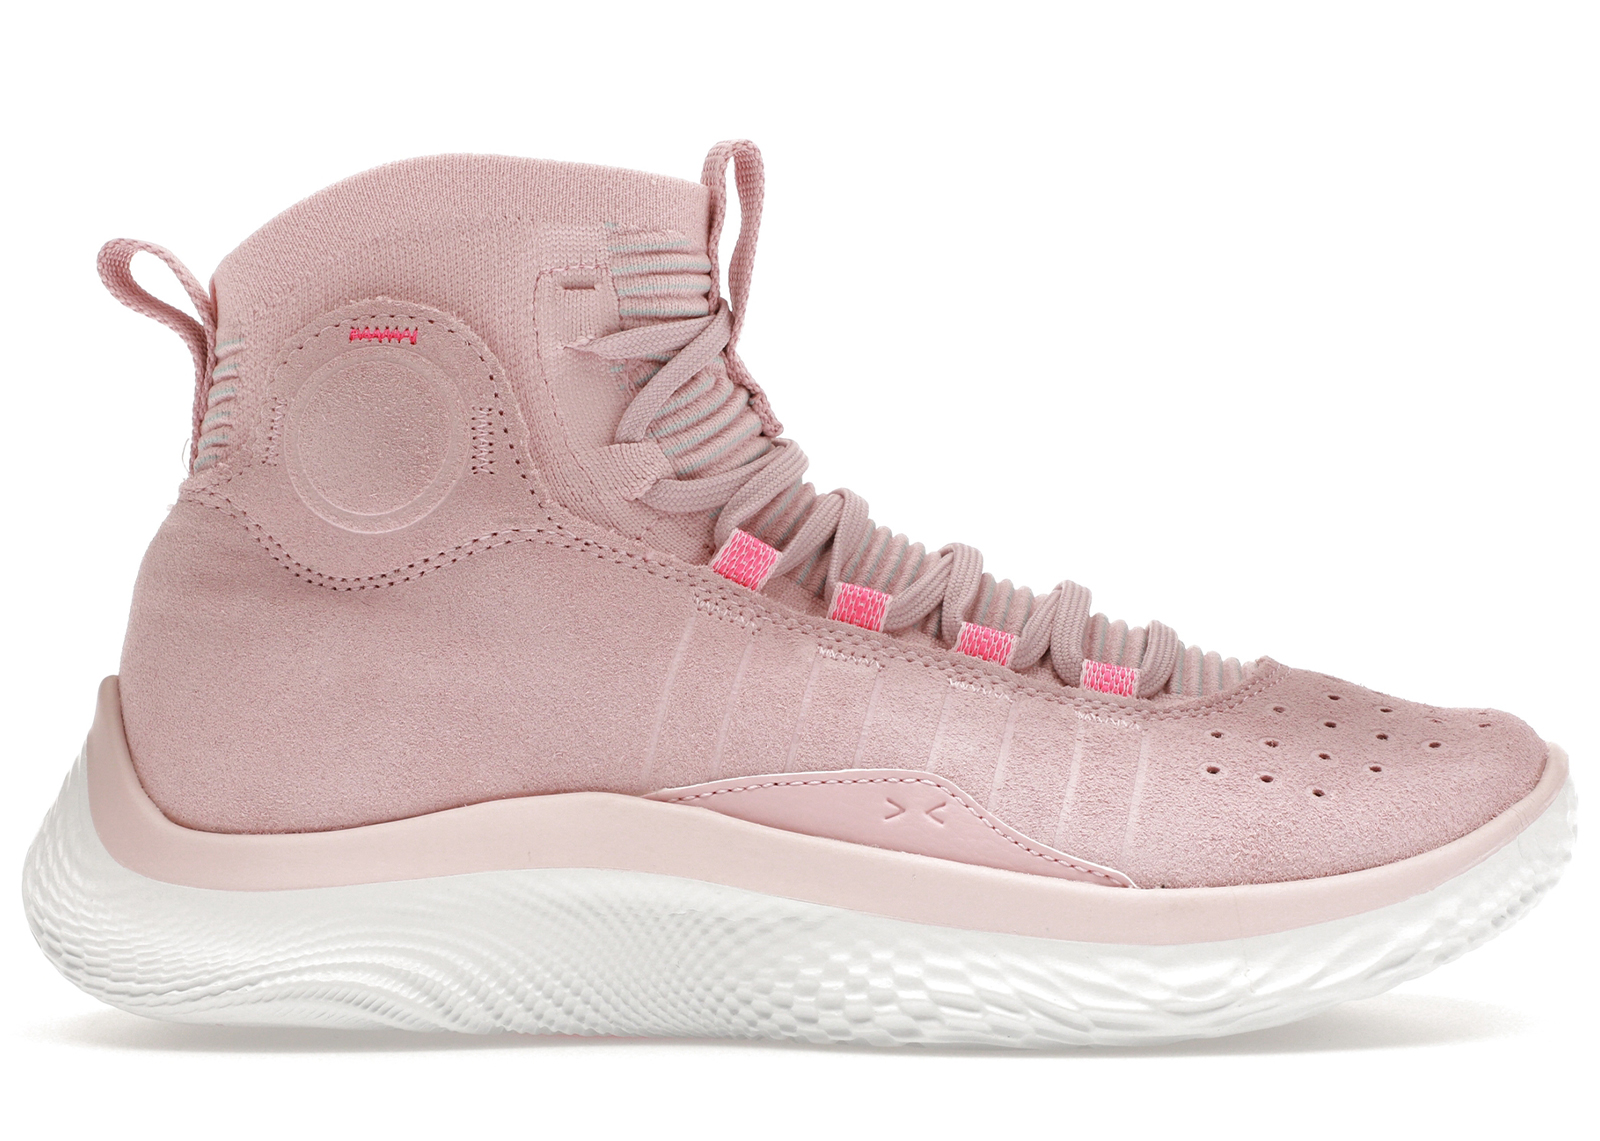 Under Armour Curry 4 Flotro Pink メンズ - 3024861-600 - JP